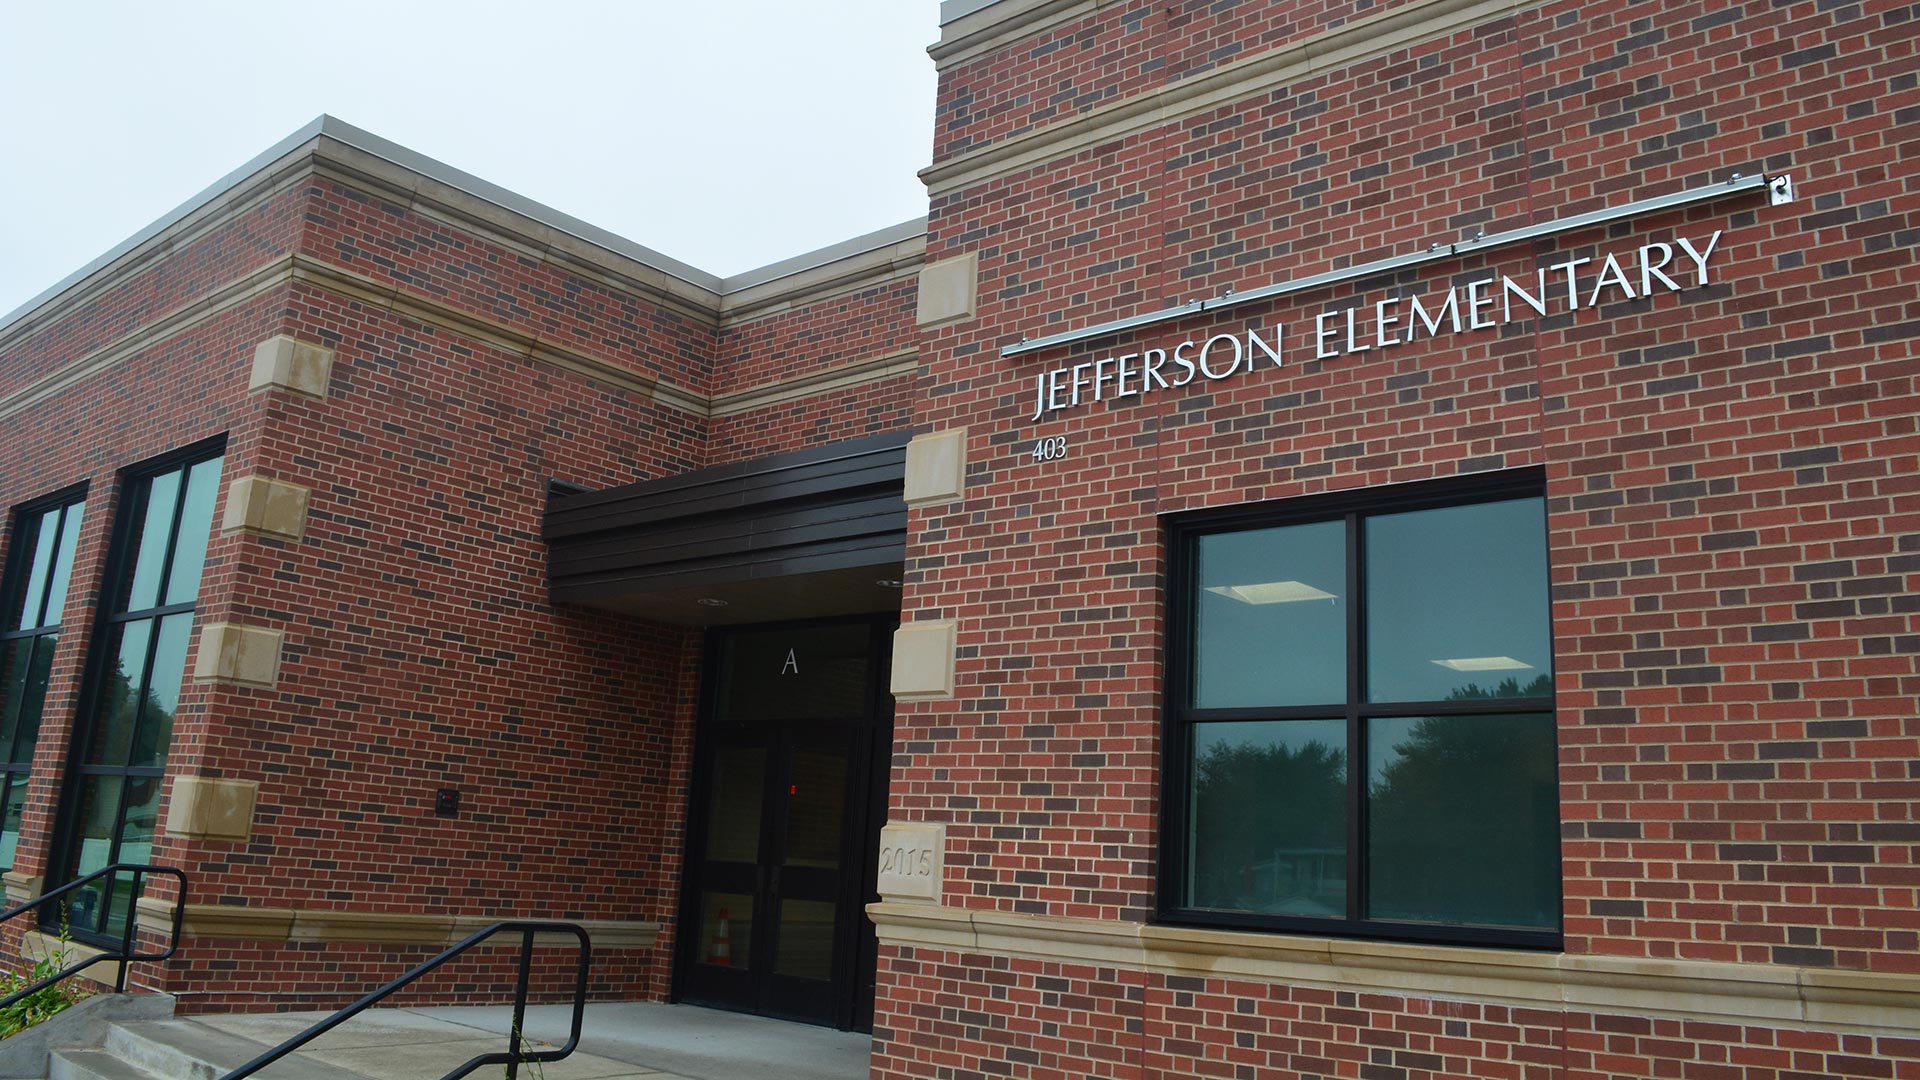 Hometown Plumbing and Heating Quad Cities Iowa Projects Jefferson Elementary School external